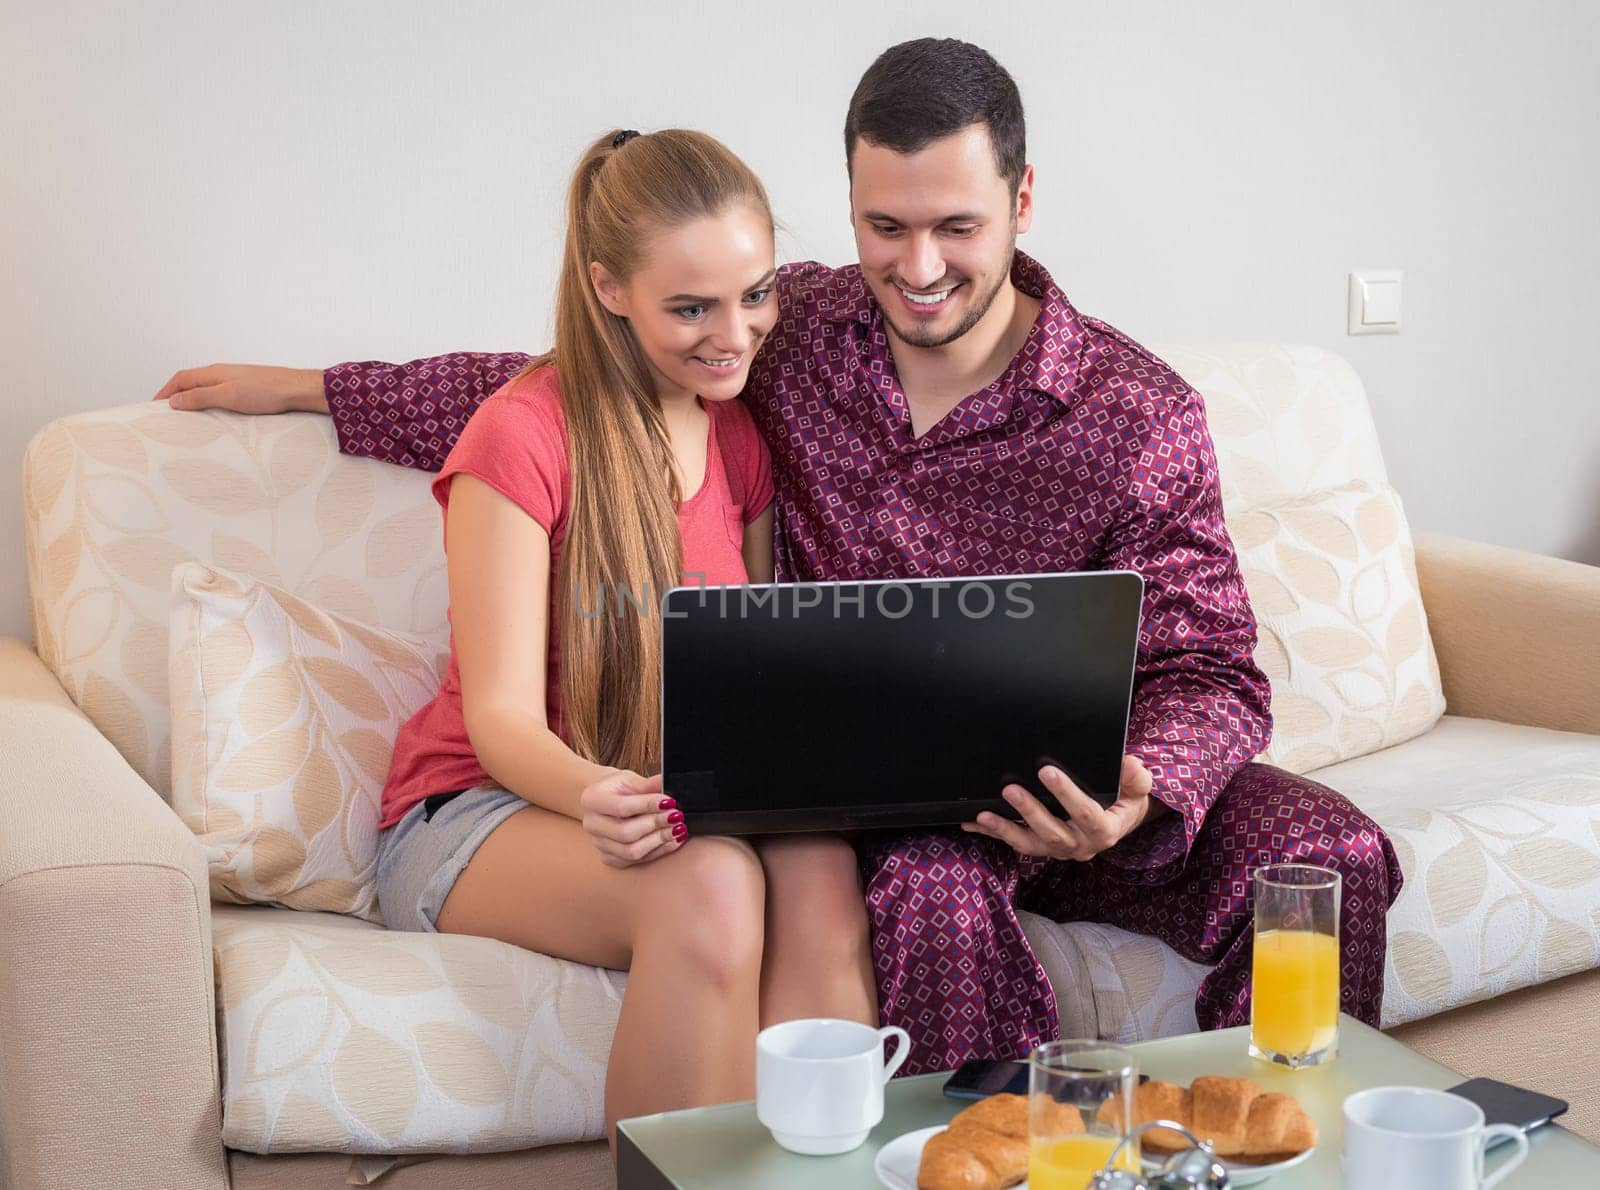 Cute young couple on the couch having breakfast, eating croissants, drinking orange juice in front of a laptop computer